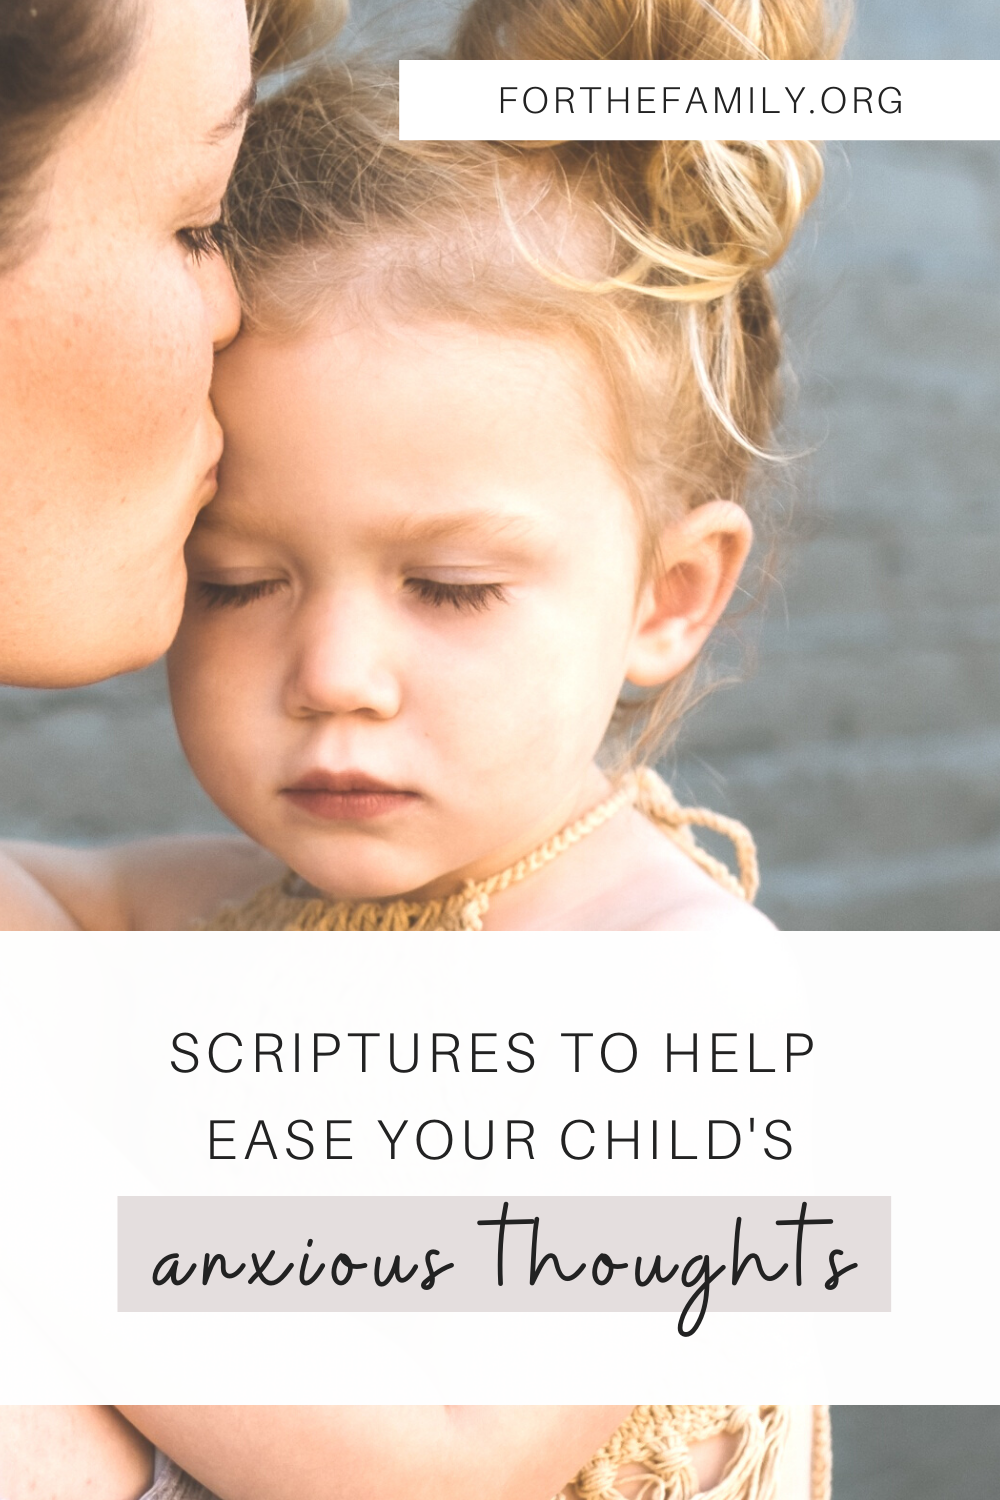 Today children are growing up under the cloud of broken marriages, the economic strain of historic rates of household debt and the ever-present pitfalls of comparing themselves to the false images they see on social media. So how then, do we as parents calm our children’s anxious thoughts? Here is how we can use Scripture to get started...